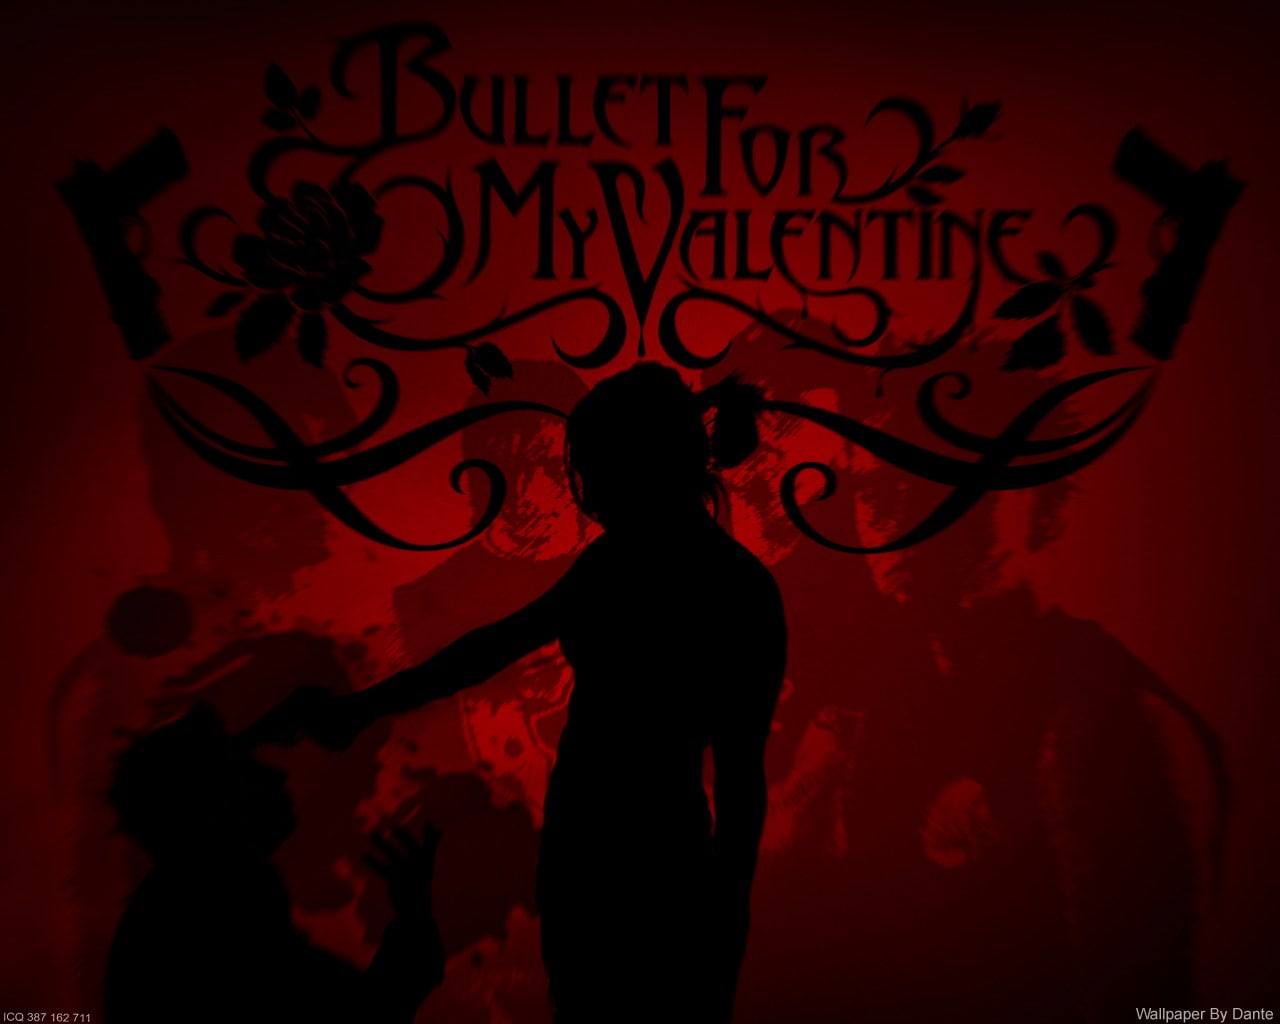 bullet for my valentine, silhouette, red, one person, illuminated